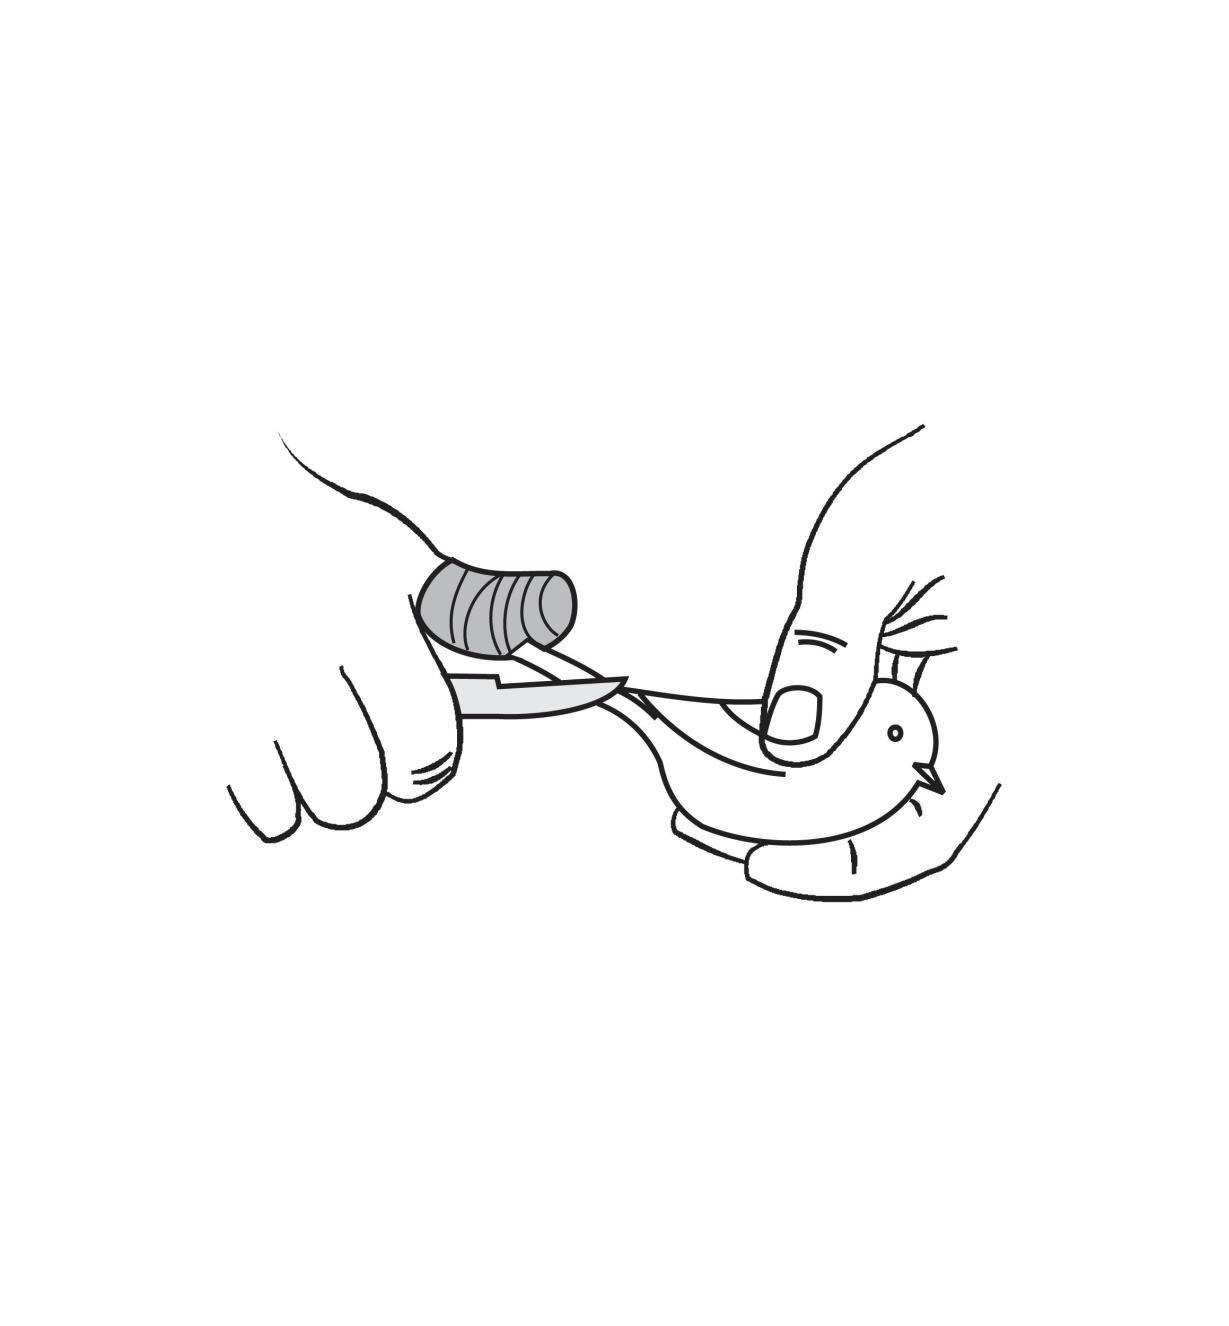 Illustration of a person with high-friction guard tape on their thumb carving a wooden bird